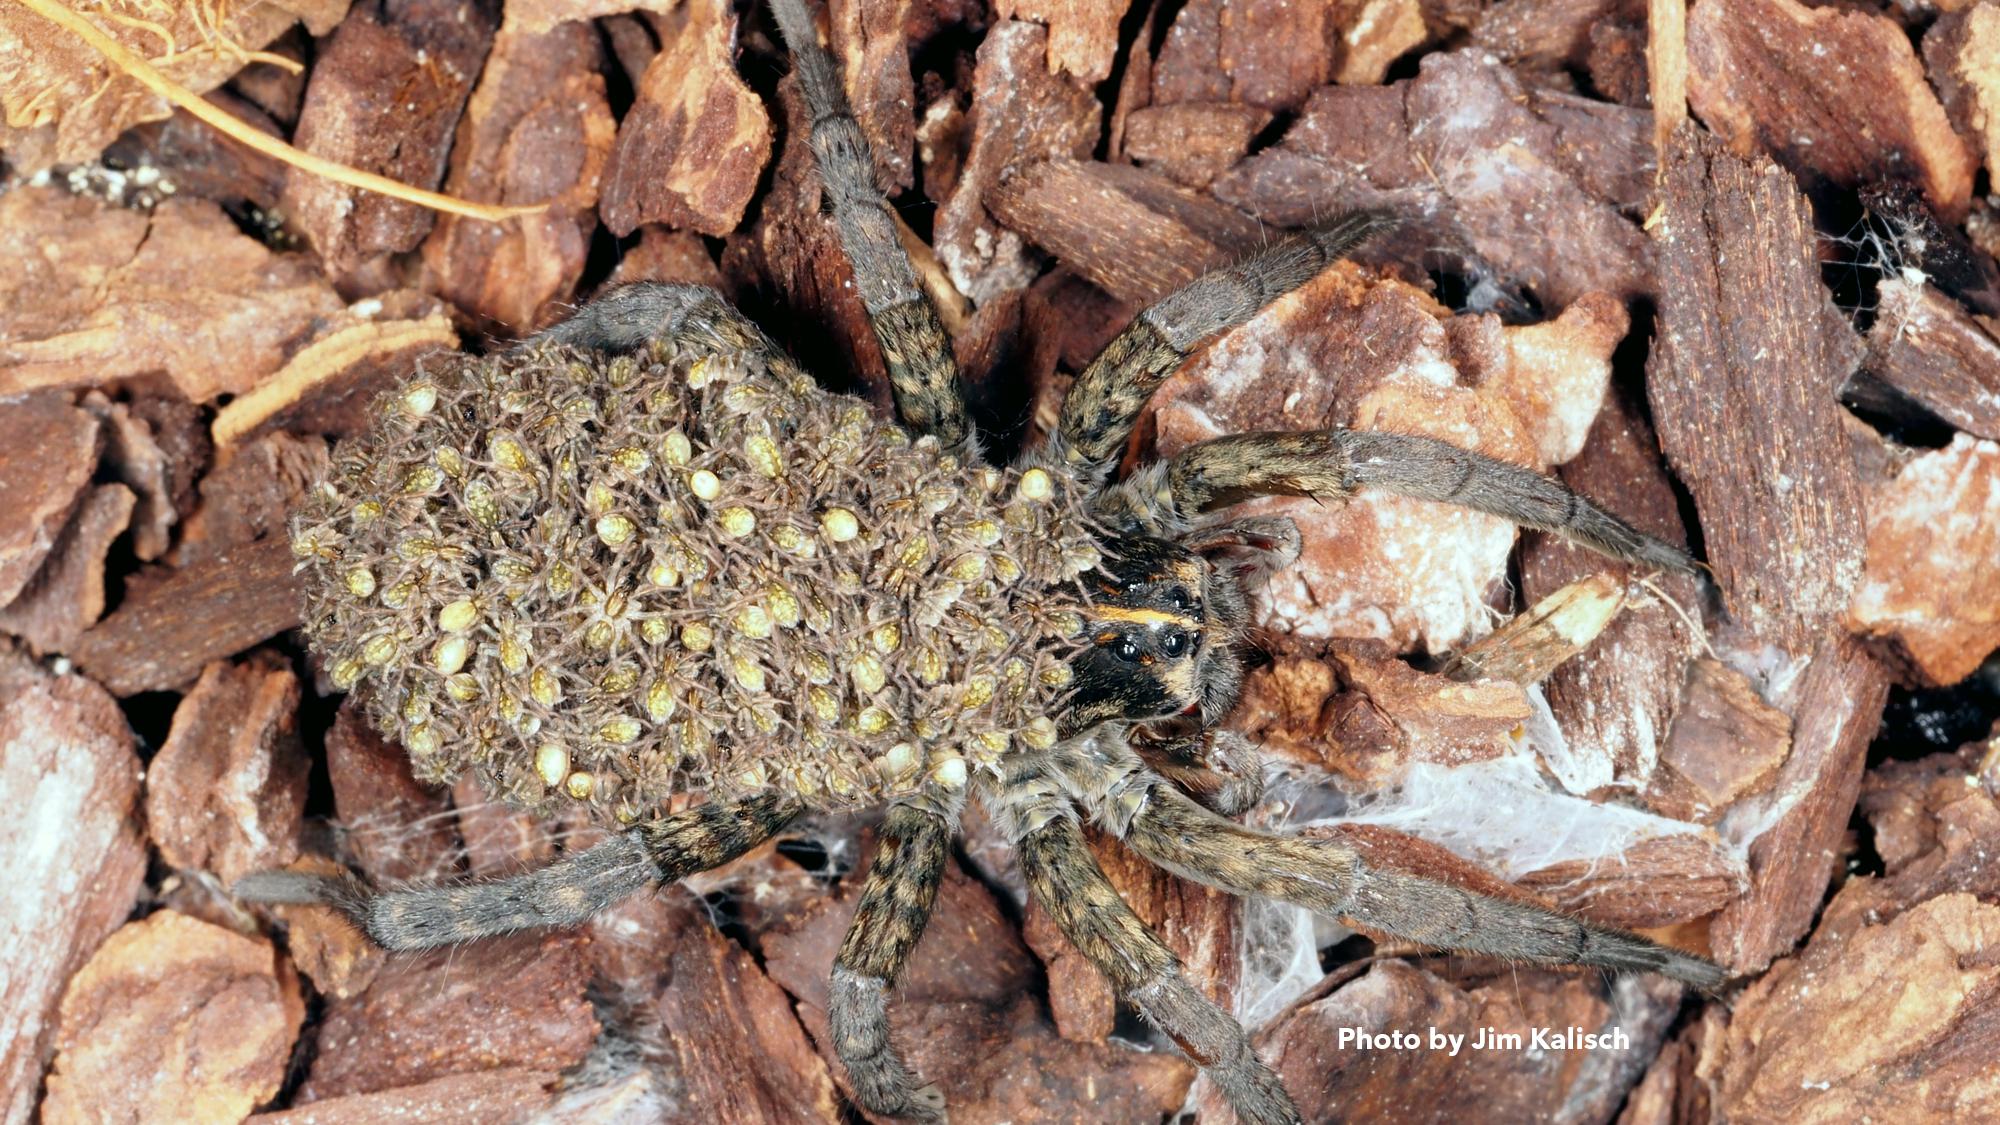 Photo of wolf spider- hogna aspersa - with spiderlings. Photo by Jim Kalisch